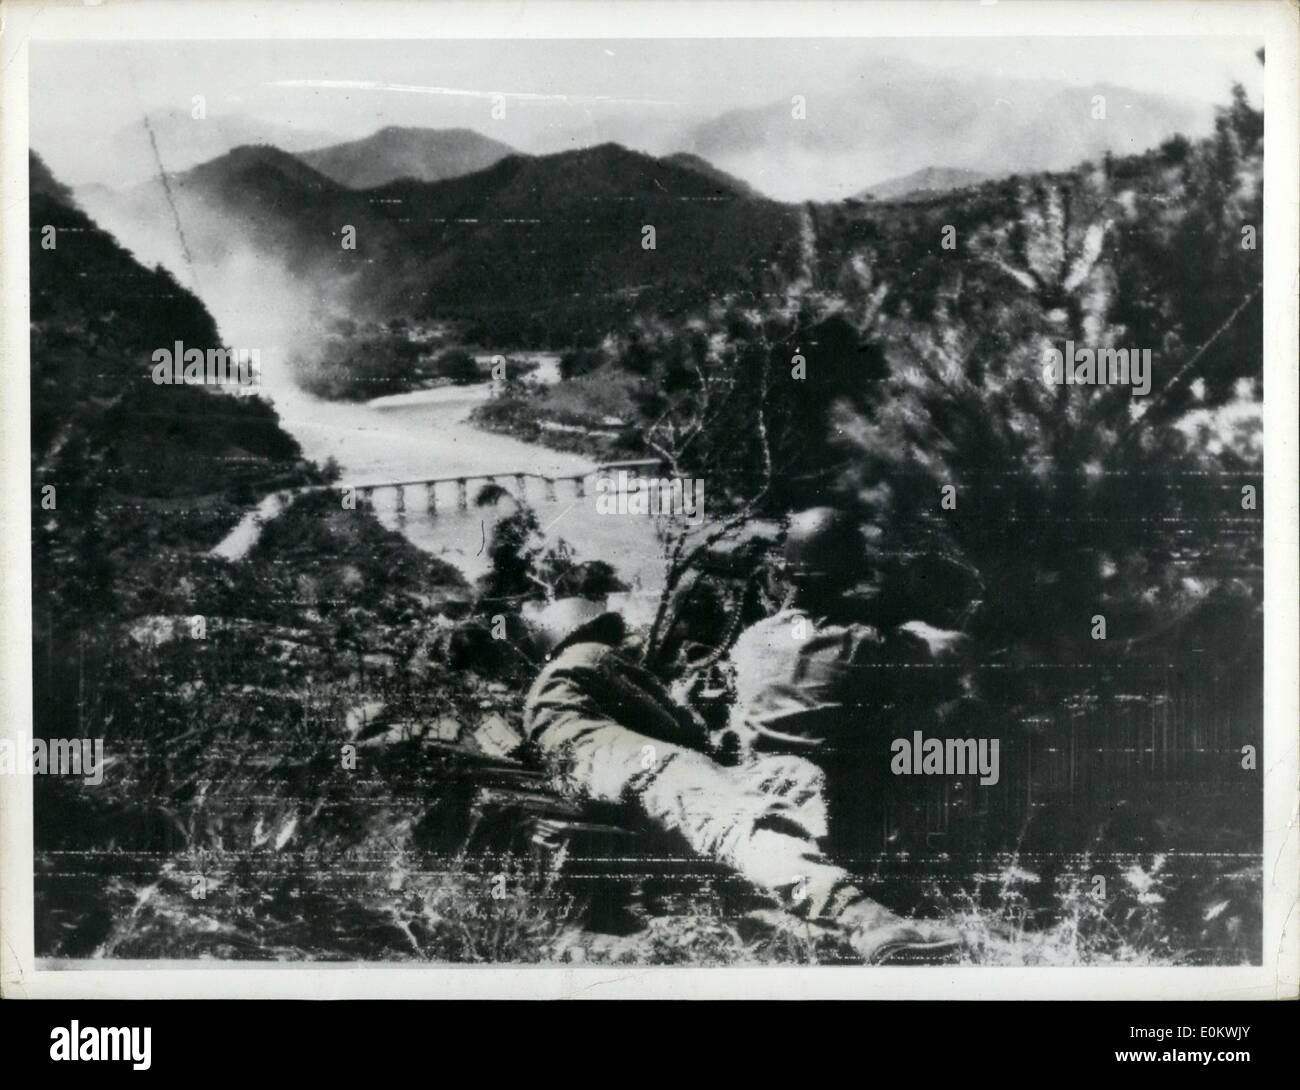 Jul. 07, 1950 - Doing some bridgework : Korea Two American infantrymen rest their machine gun on an emplacement overclocking a bridge, half destroyed and fire at the opposite ridge, about 2 miles north of Chingog. Ni.Yusong position over looking the kap-chion river and the main hishuray. Stock Photo